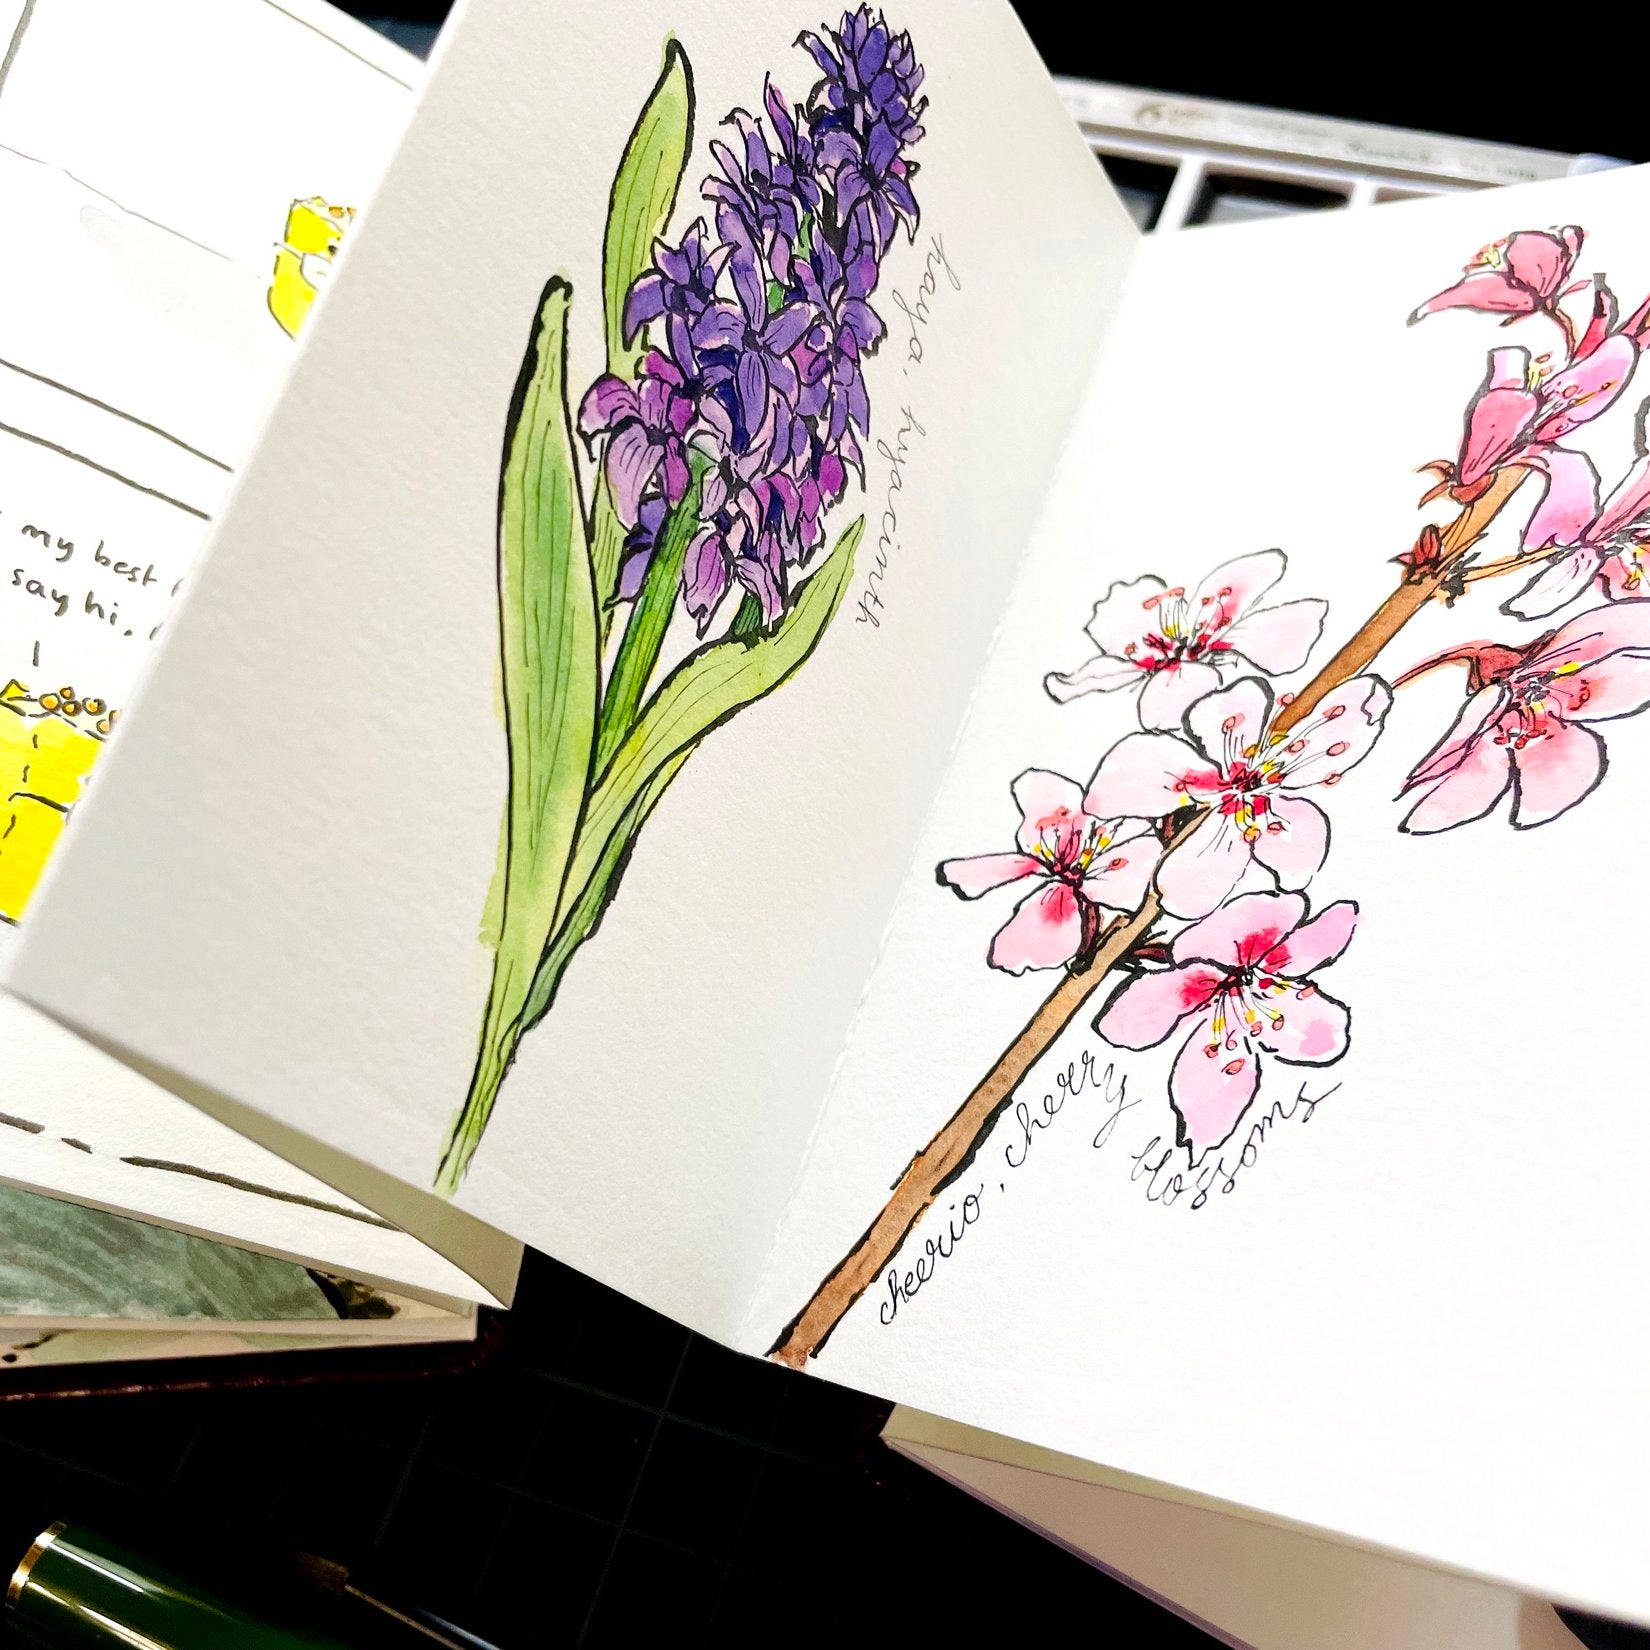 DRAWING IDEAS FOR YOUR MINI SKETCHBOOK